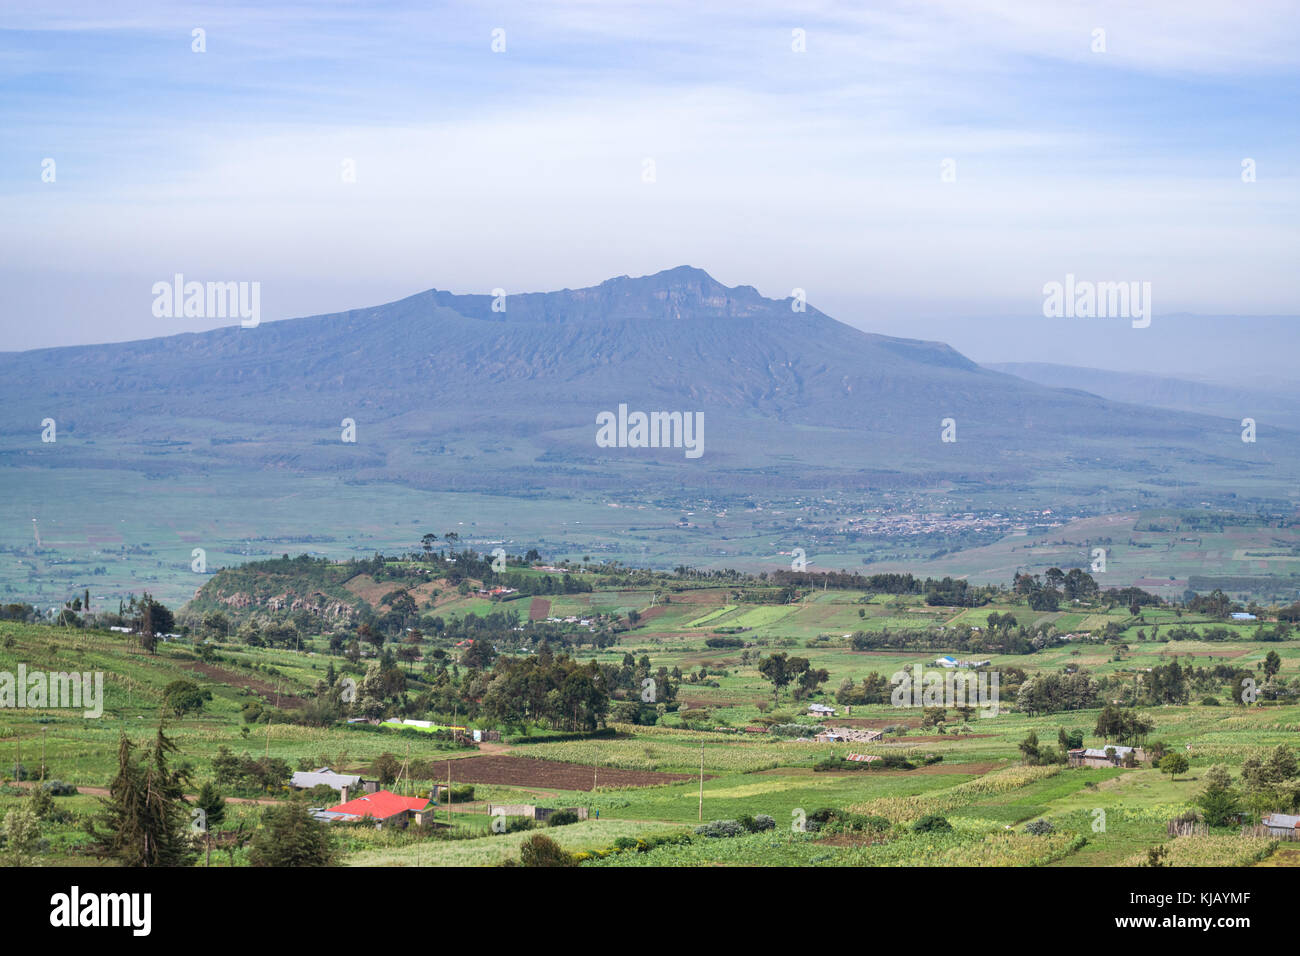 Mount Longonot in distant haze during rainy season with farmland and countryside below, Kenya, East Africa Stock Photo